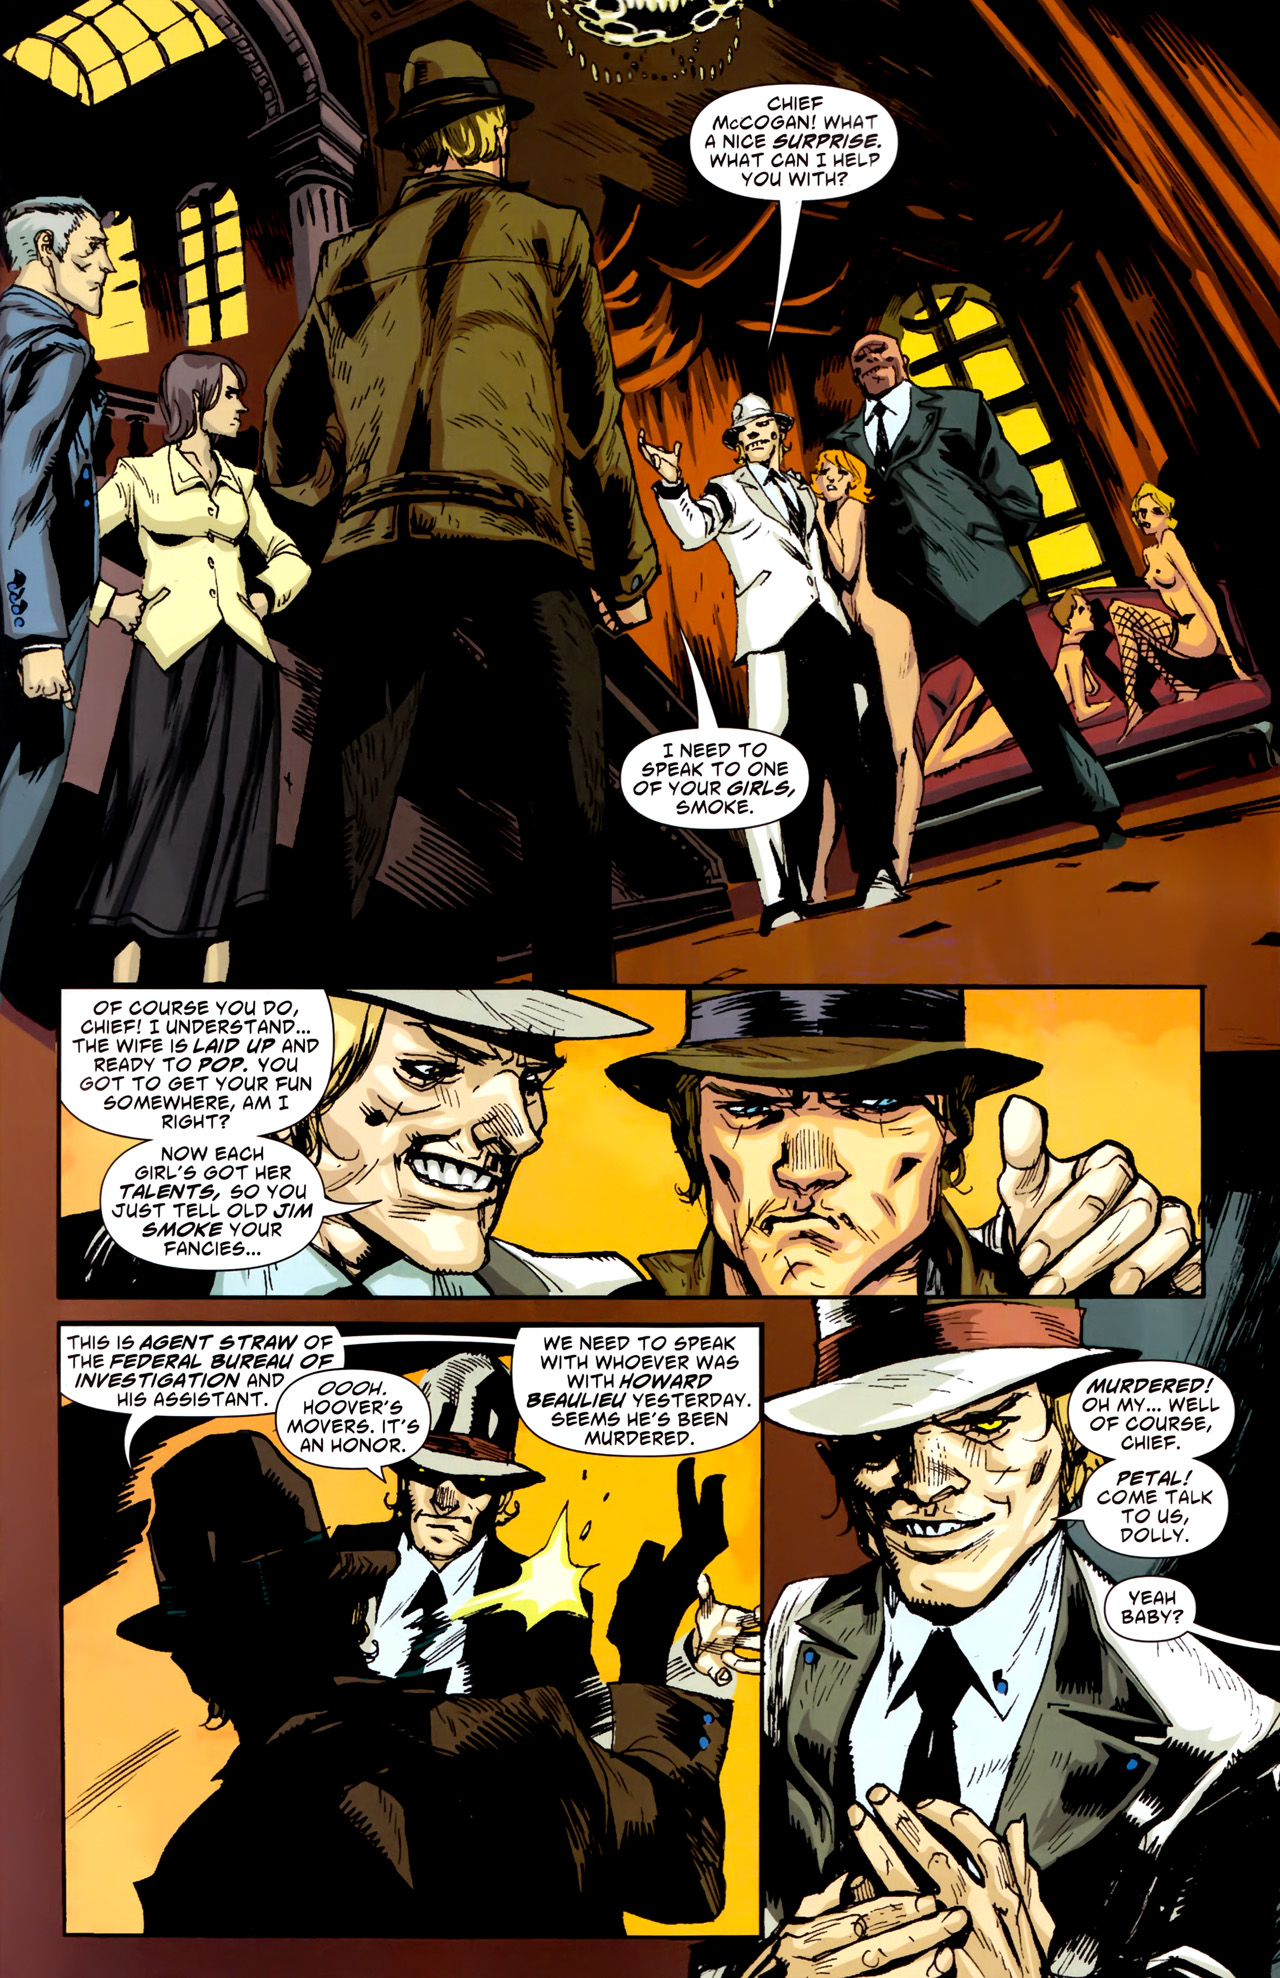 American Vampire #7 - Devil in the Sand, Part Two 